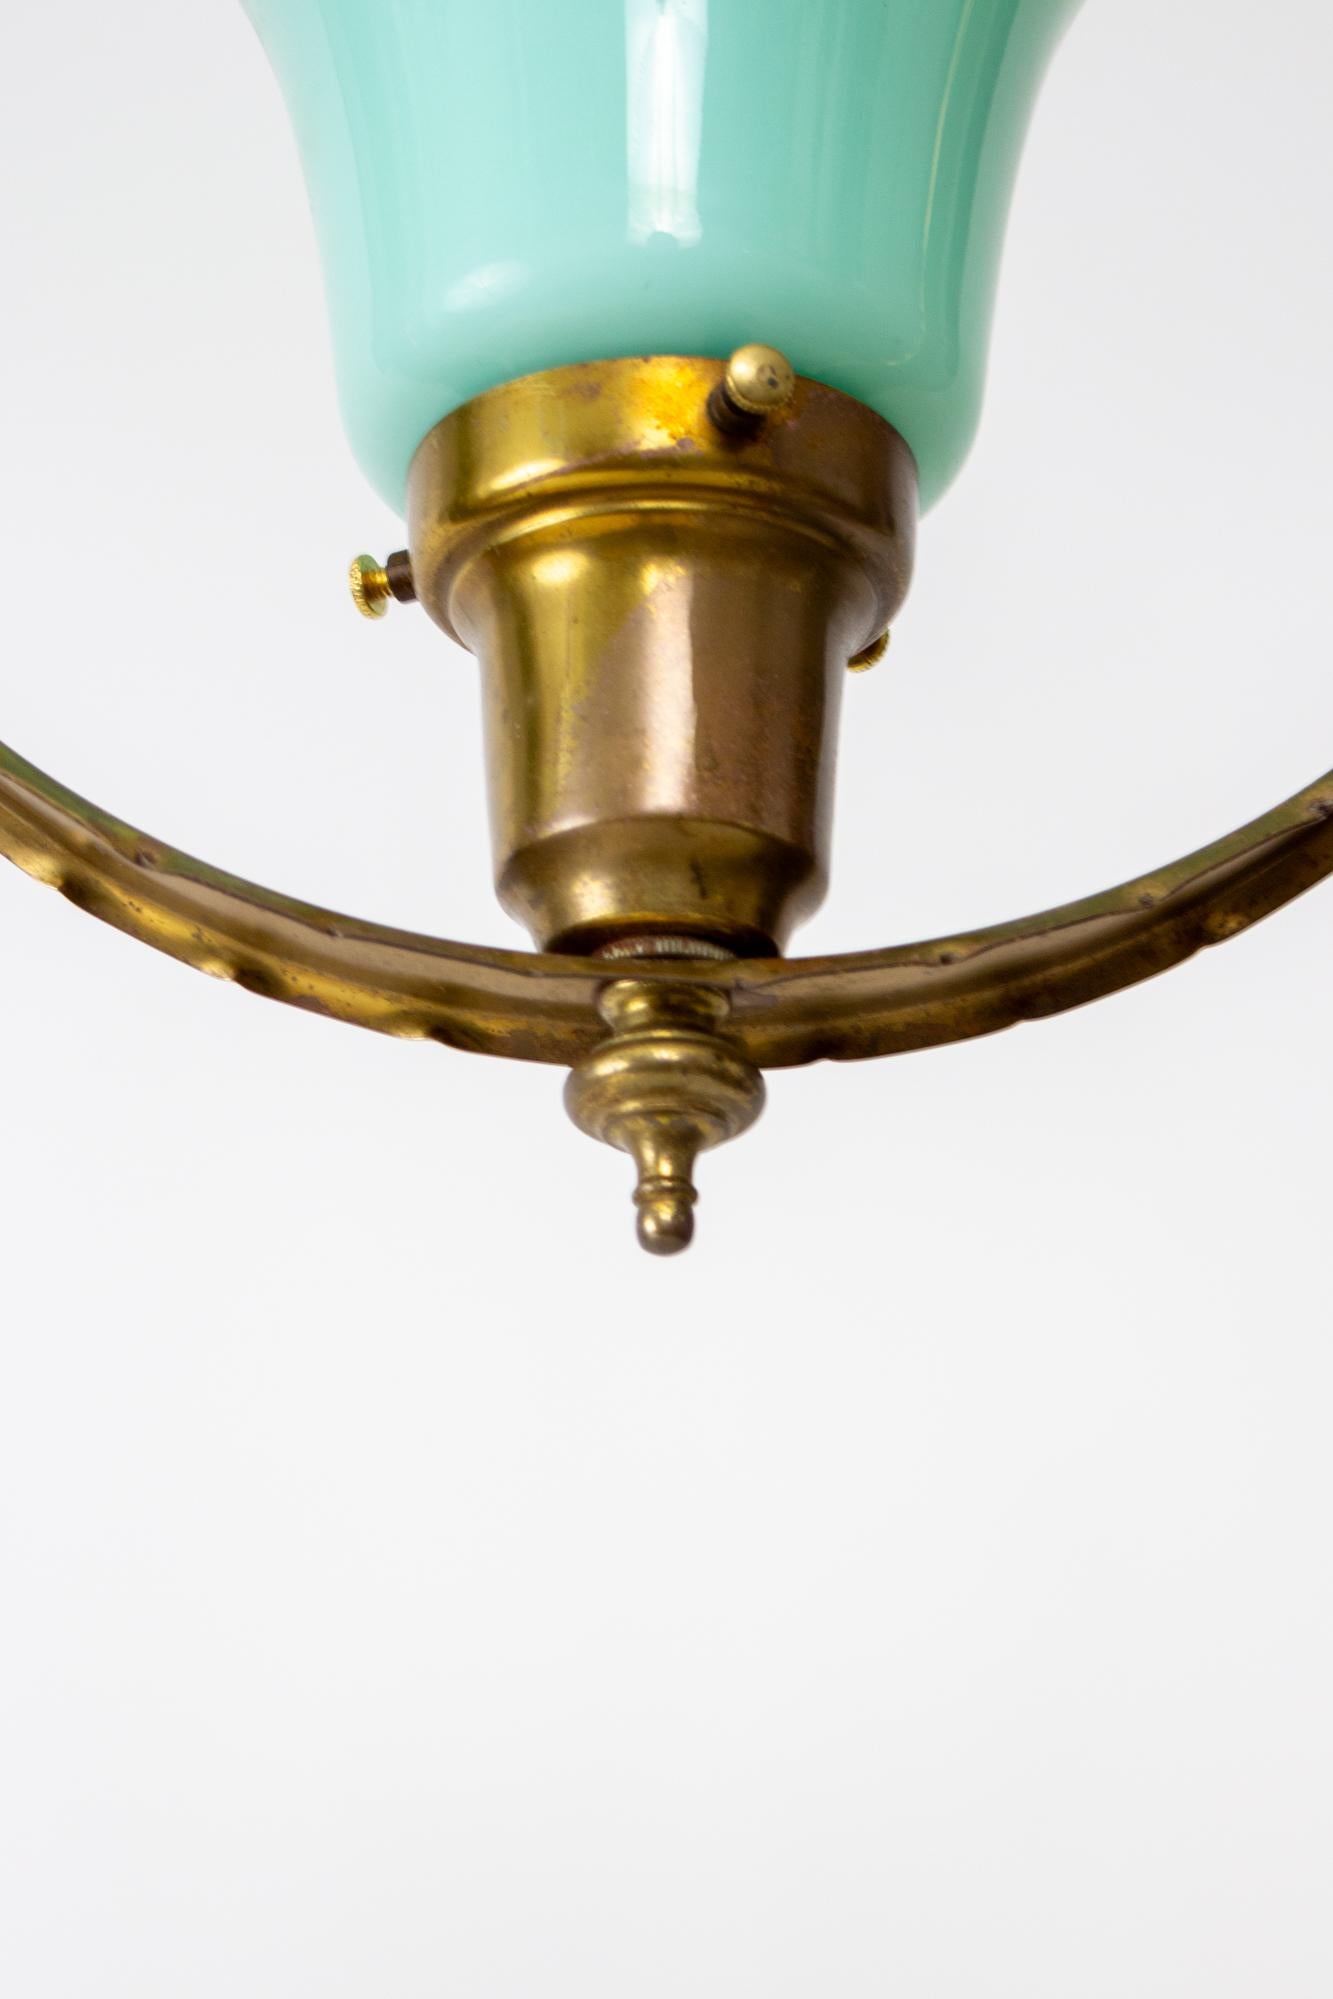 Mid 20th Century hall pendant with turquoise glass. A harp shaped fixture with a round hoop surrounding the light which shines down into an upfacing shade. The socket is hidden by a pressed glass ornamental cup with just peeks out from inside the